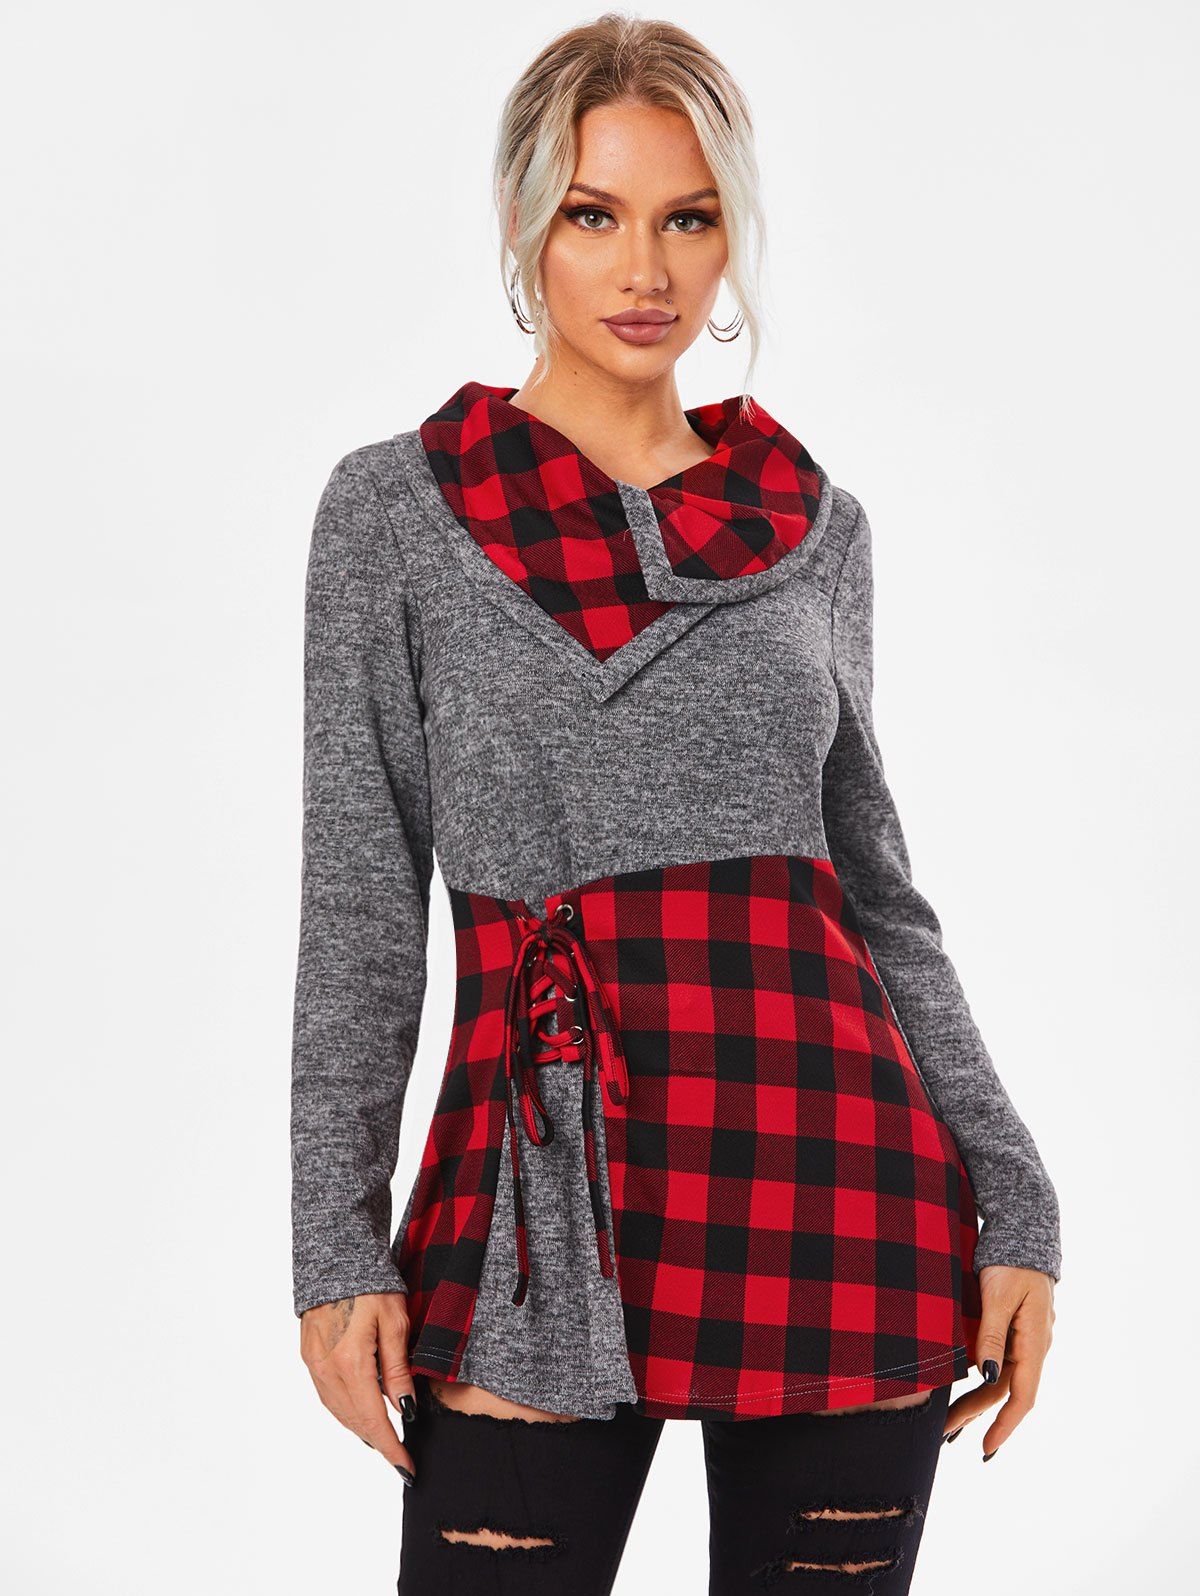 Plaid Print Lace-up 2 In 1 Sweater - GRAY L